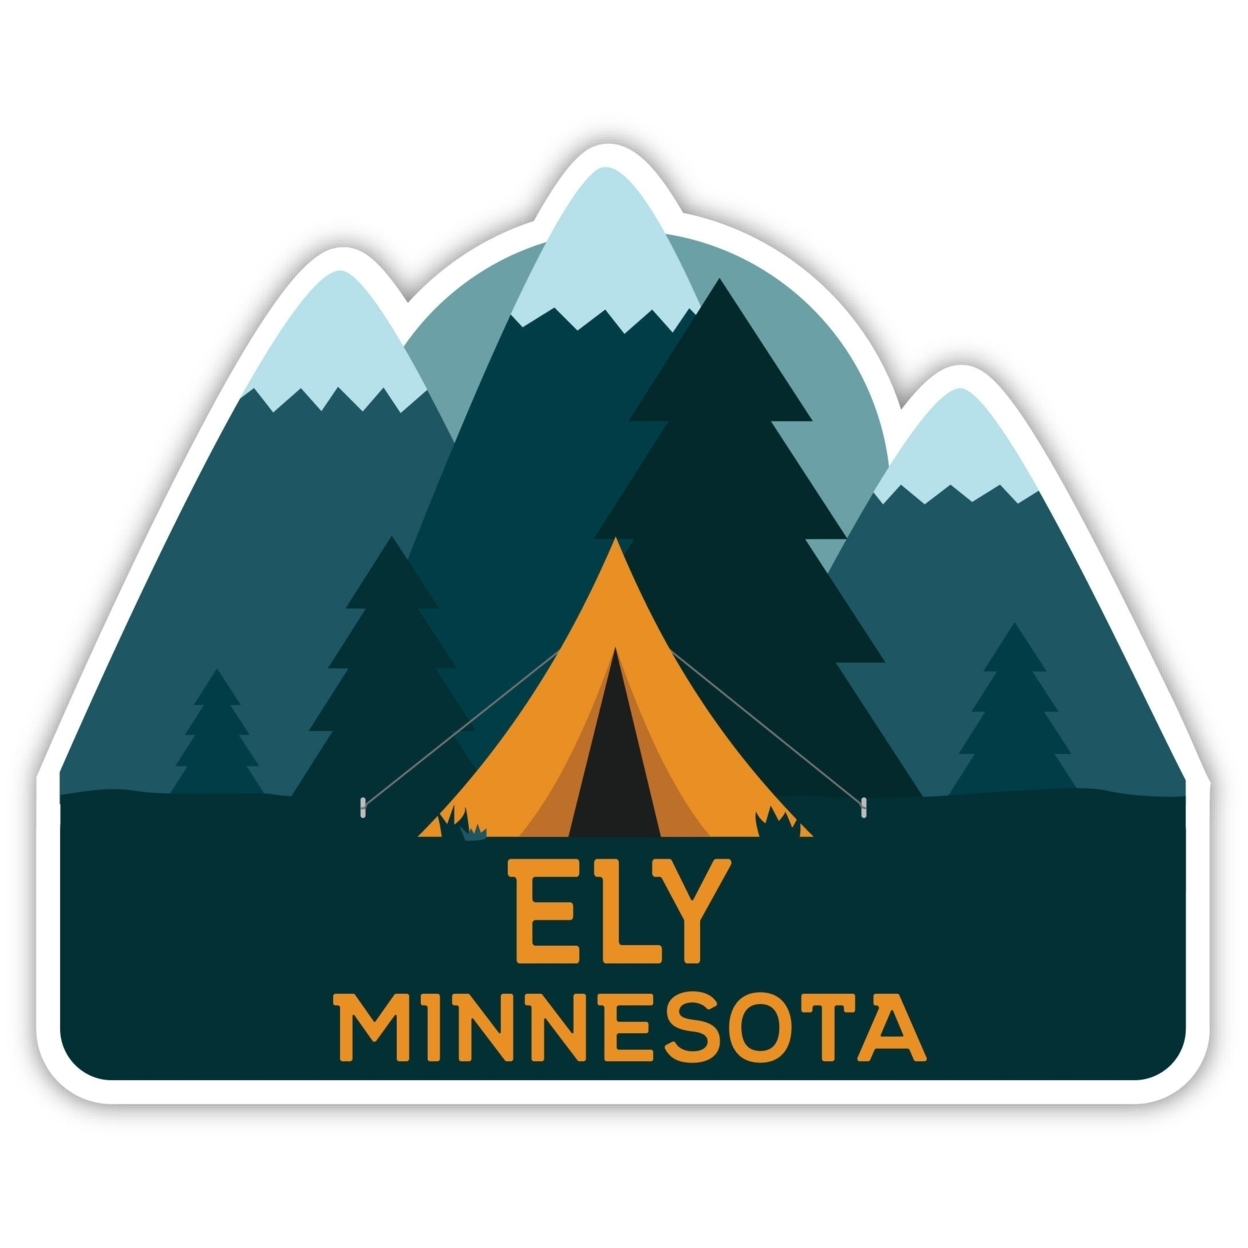 Ely Minnesota Souvenir Decorative Stickers (Choose Theme And Size) - 4-Pack, 4-Inch, Tent